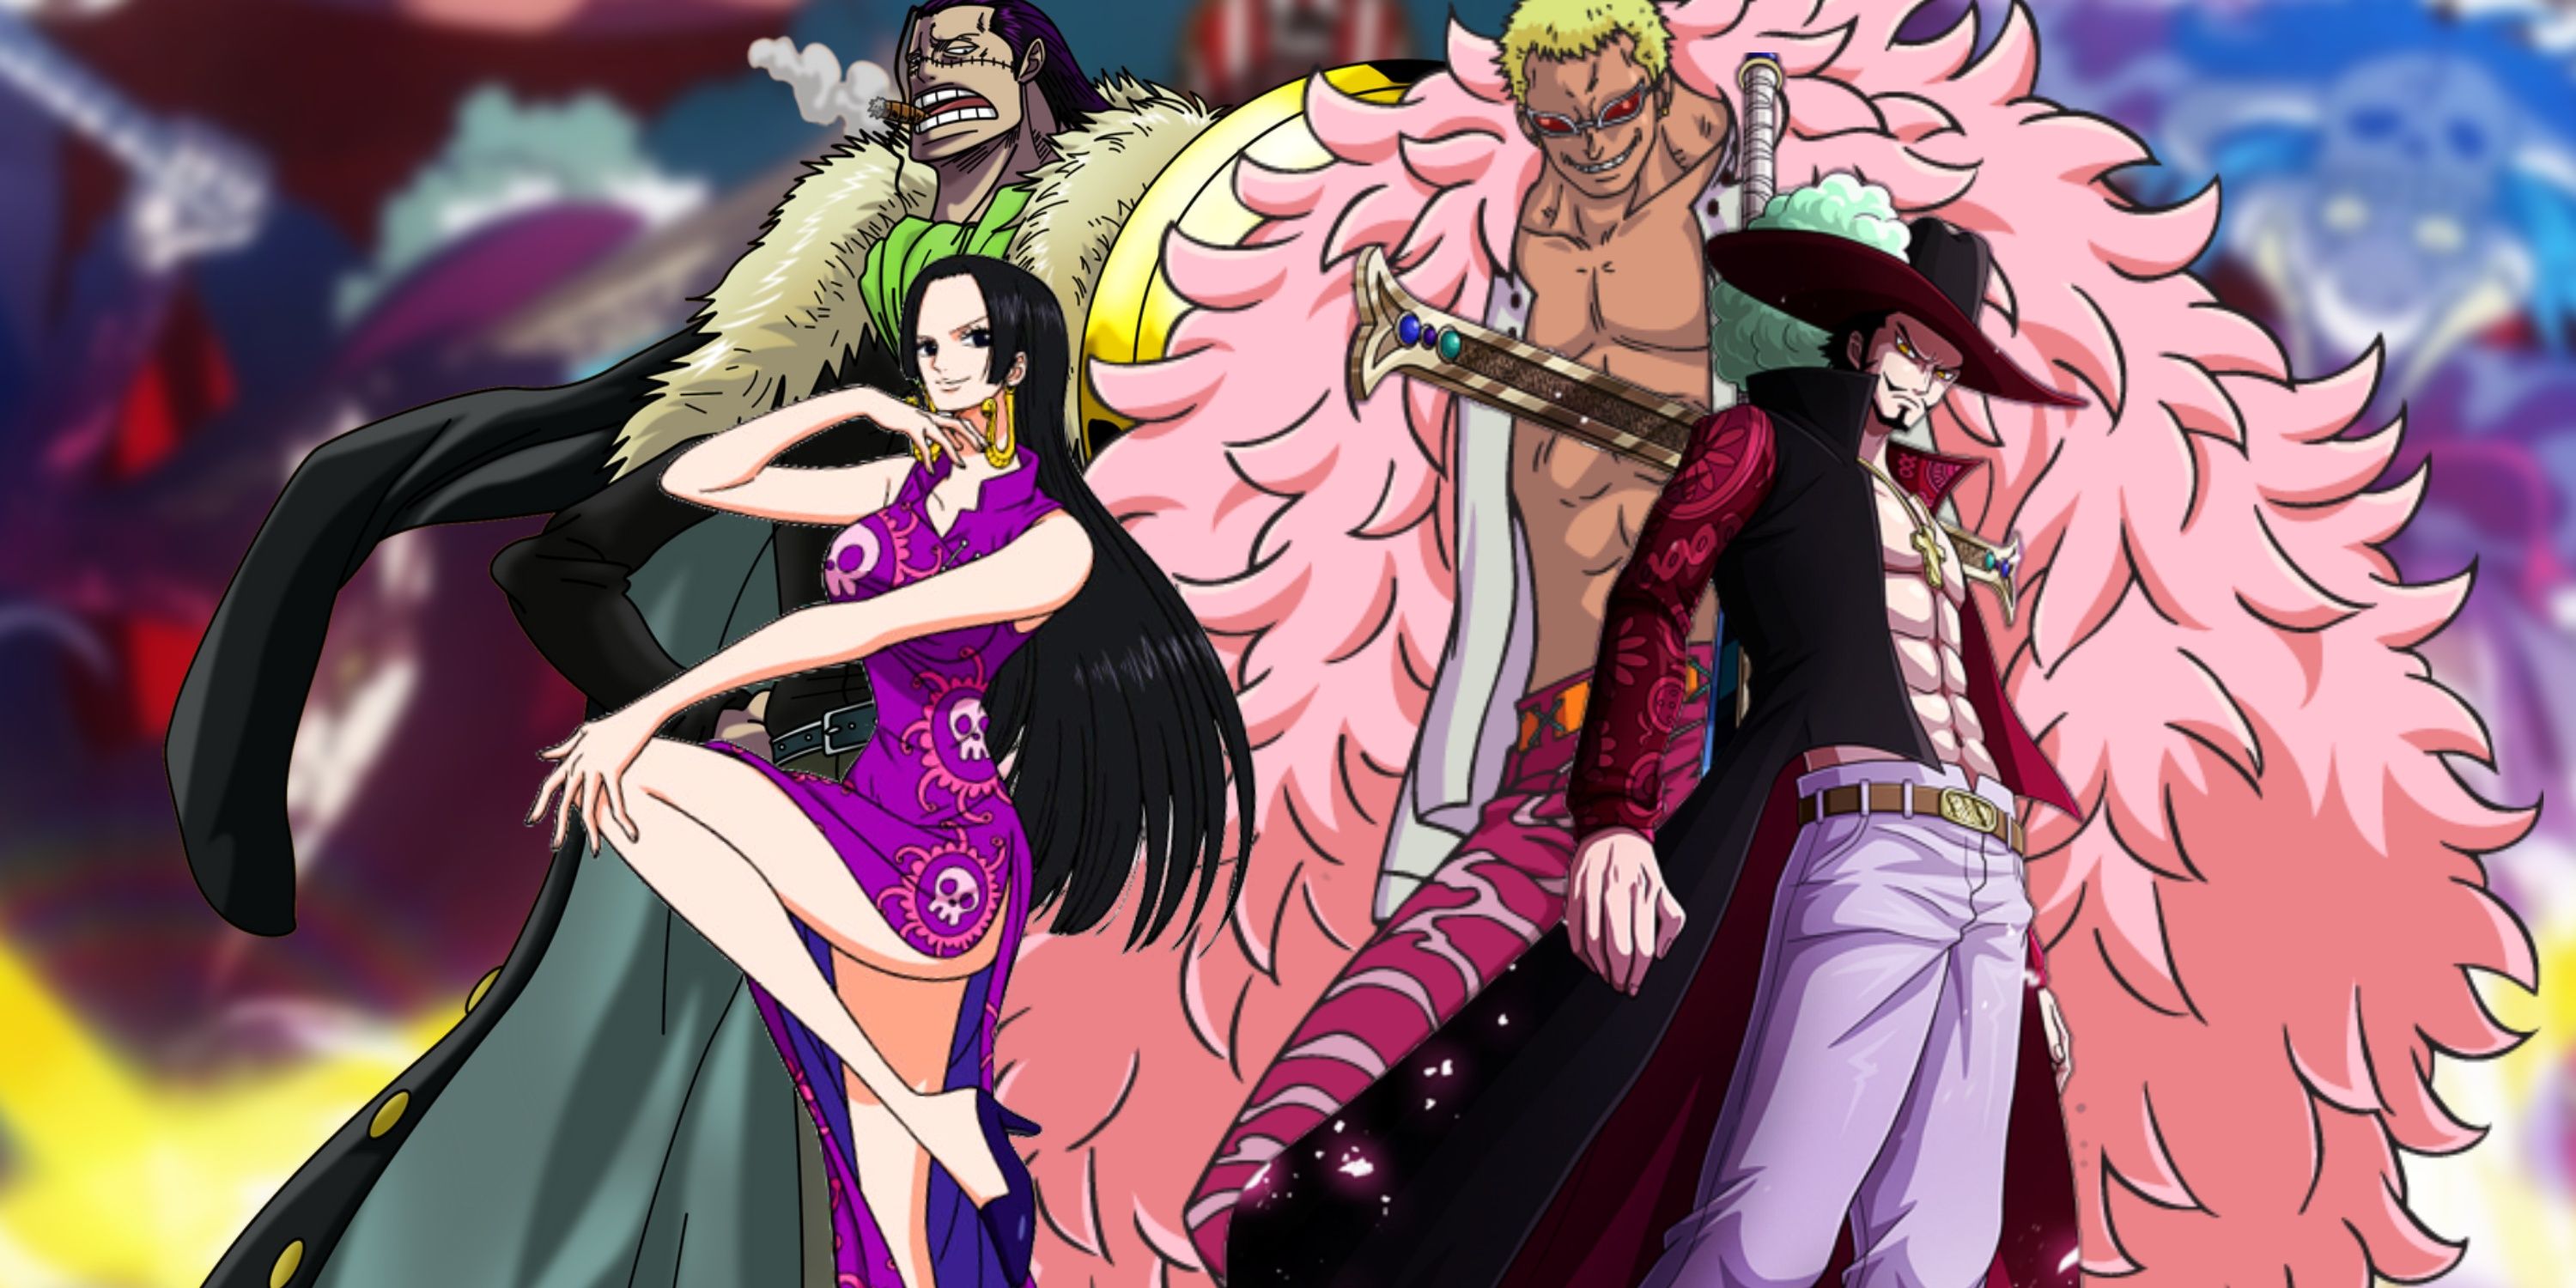 One Piece Which Of The Seven Warlords Had The Best Design Mihawk Doflamingo Hancock Crocodile - Featured